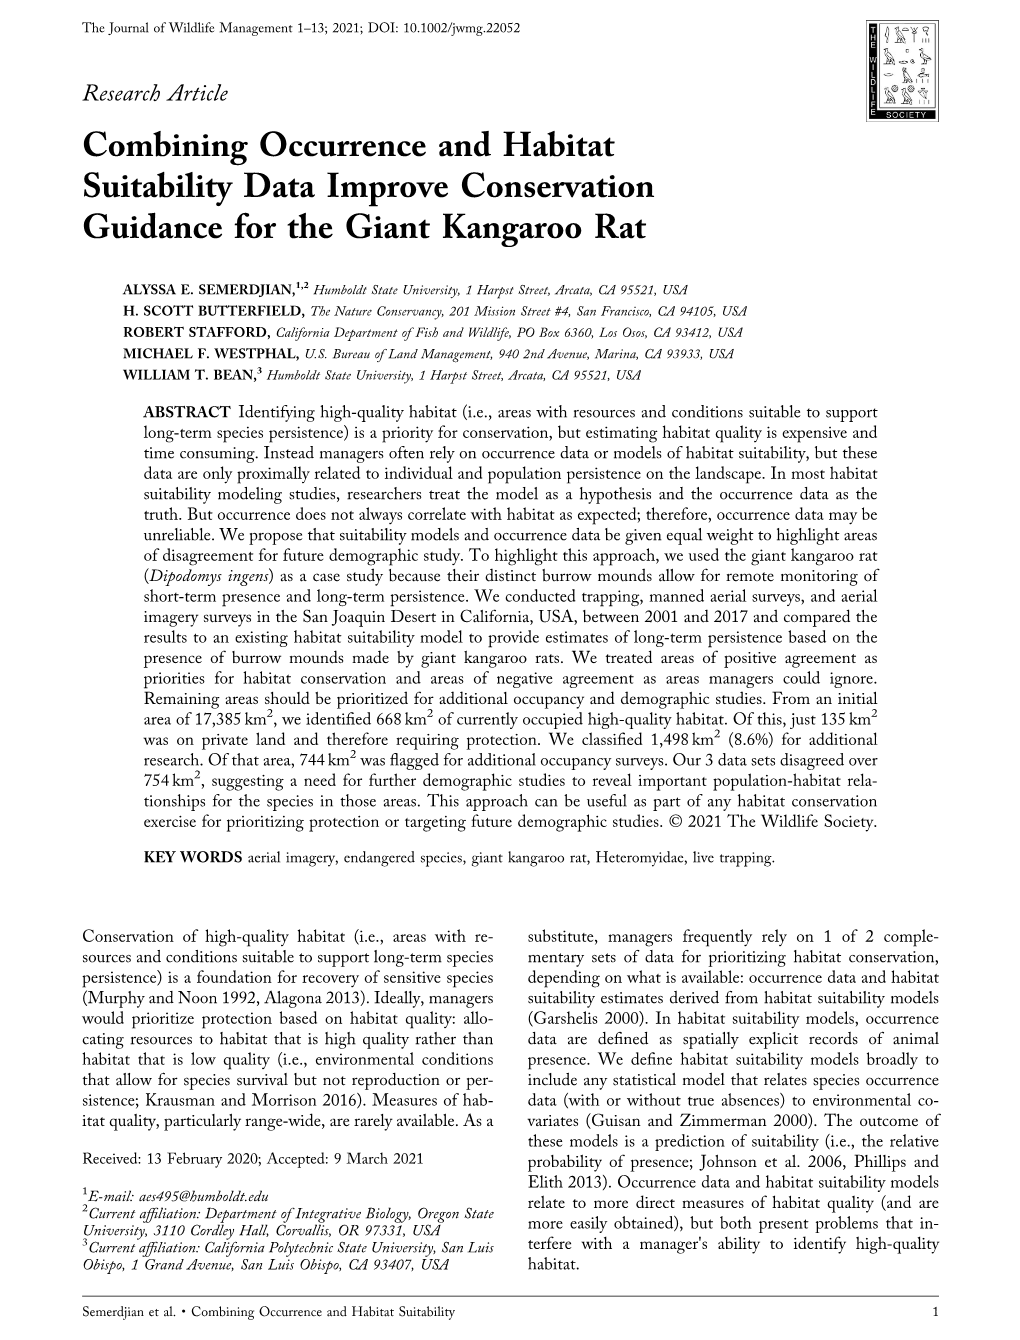 Combining Occurrence and Habitat Suitability Data Improve Conservation Guidance for the Giant Kangaroo Rat